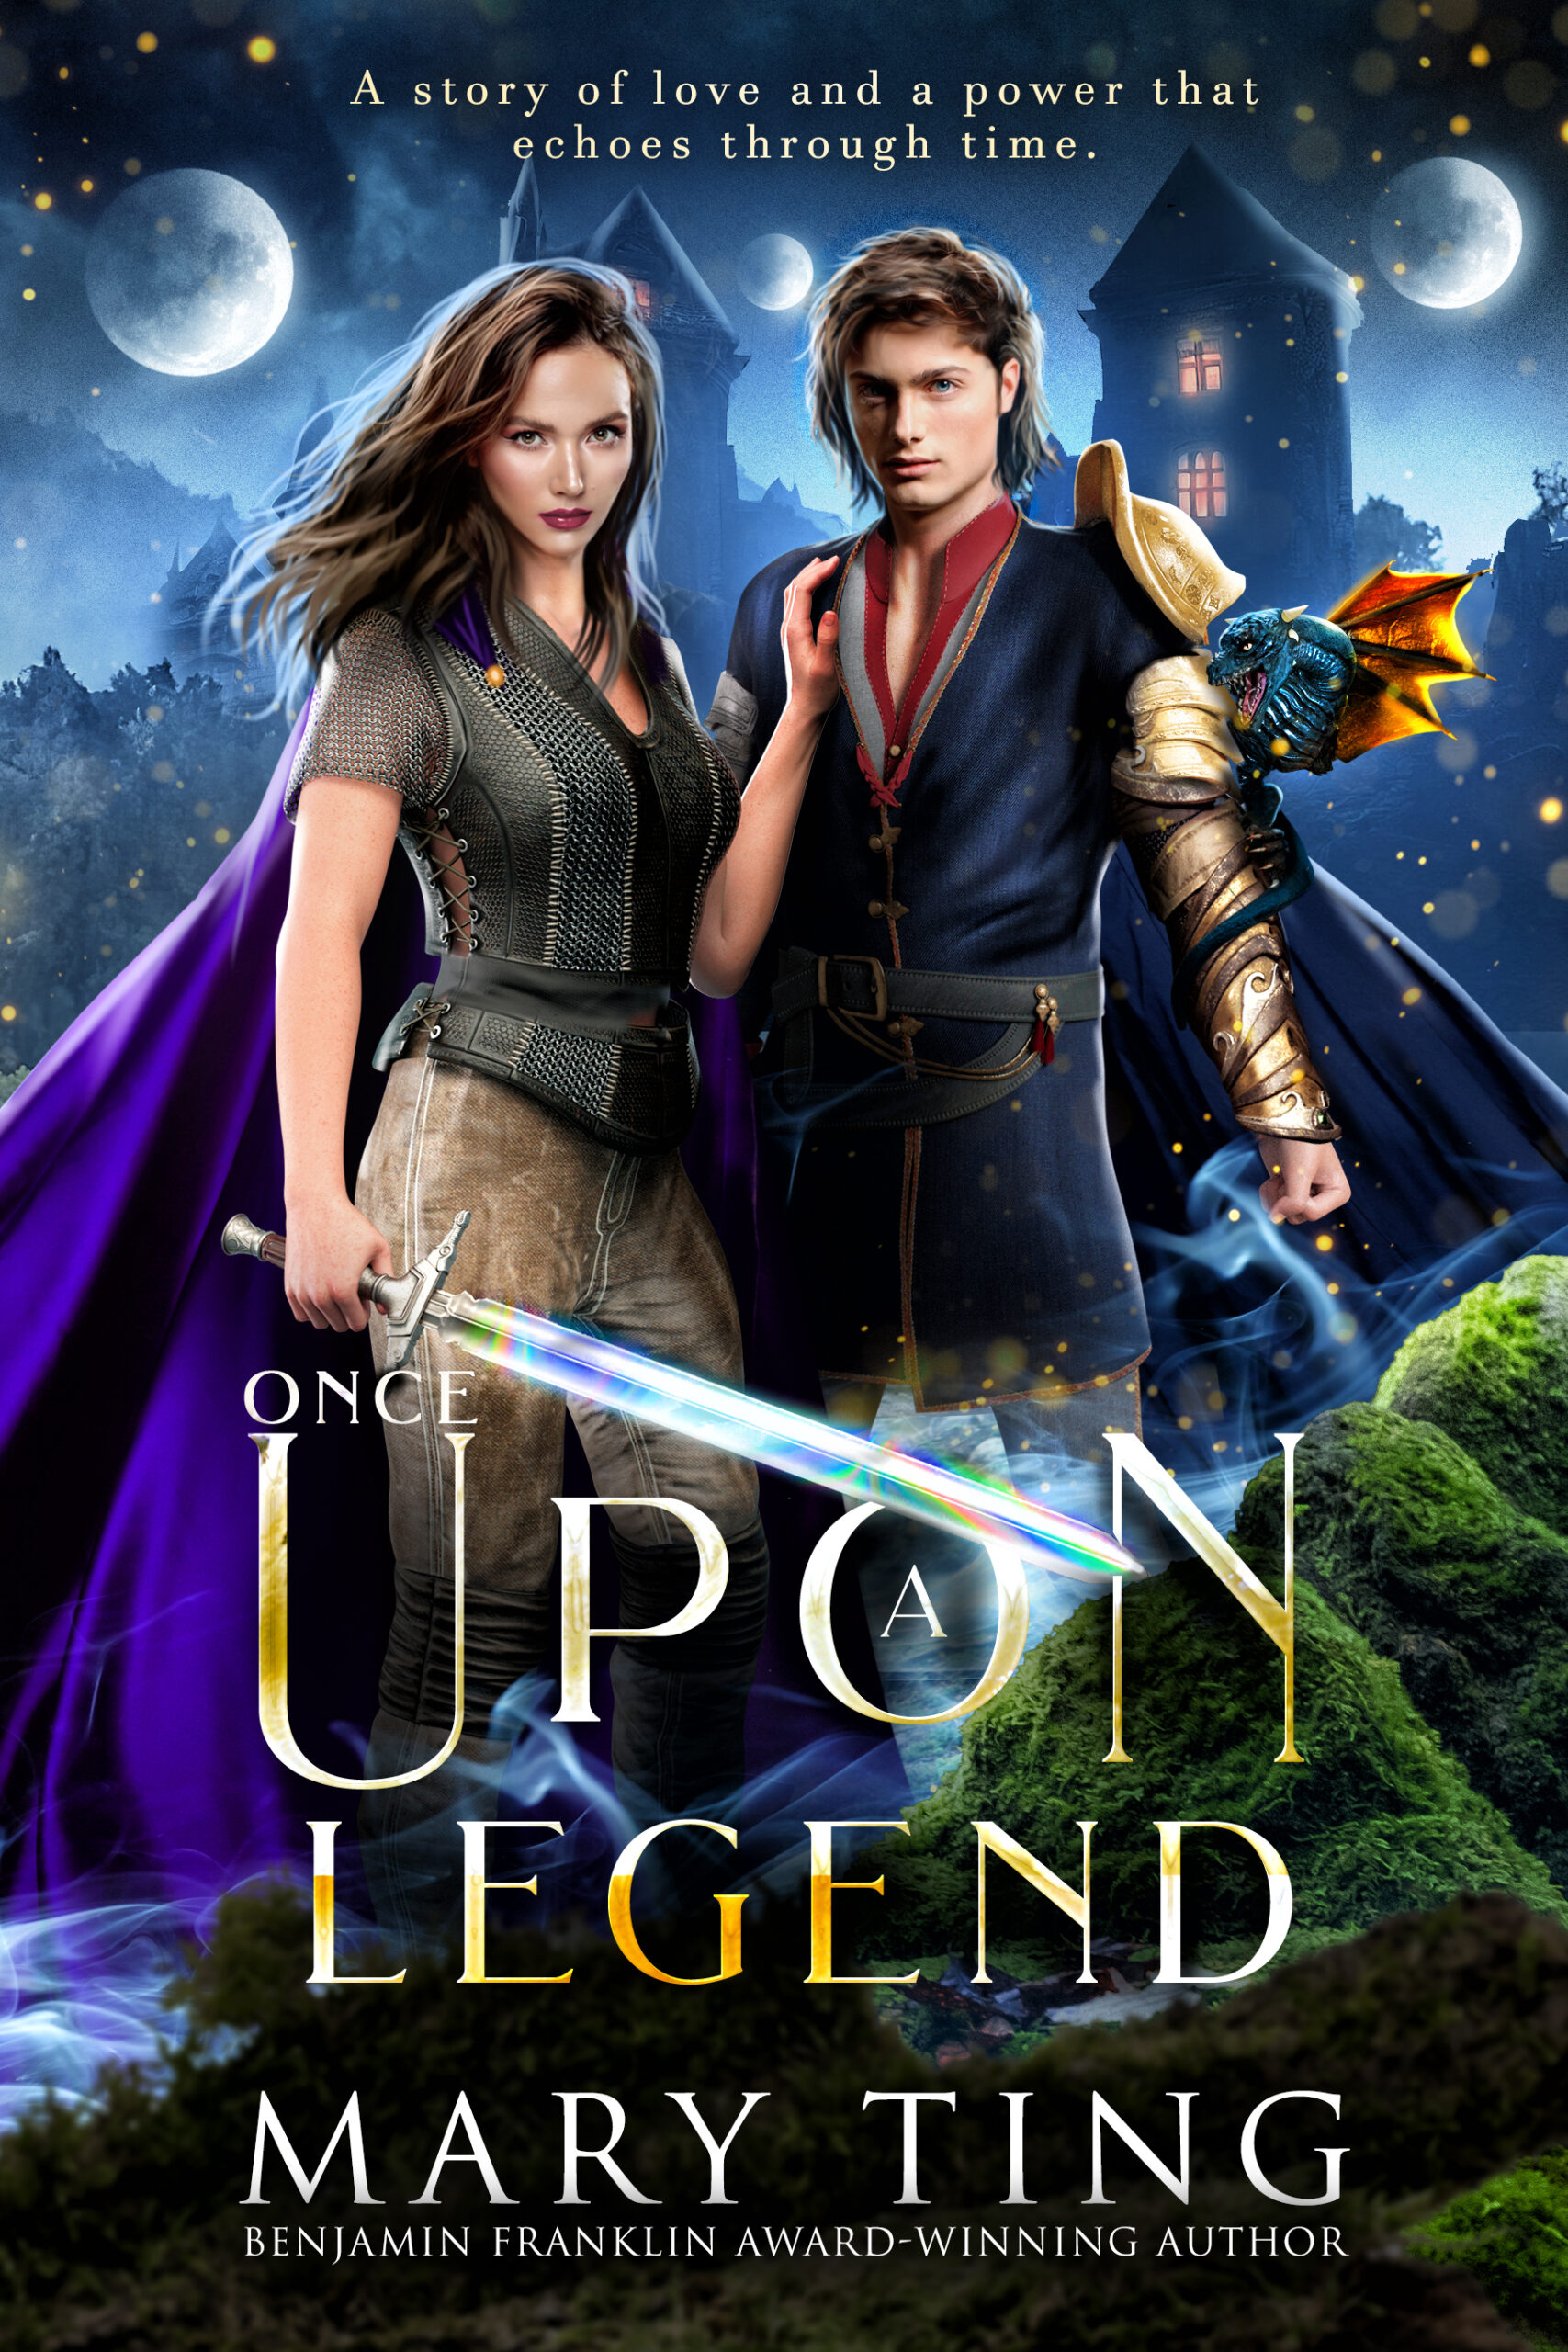 Once Upon a Legend by Mary Ting